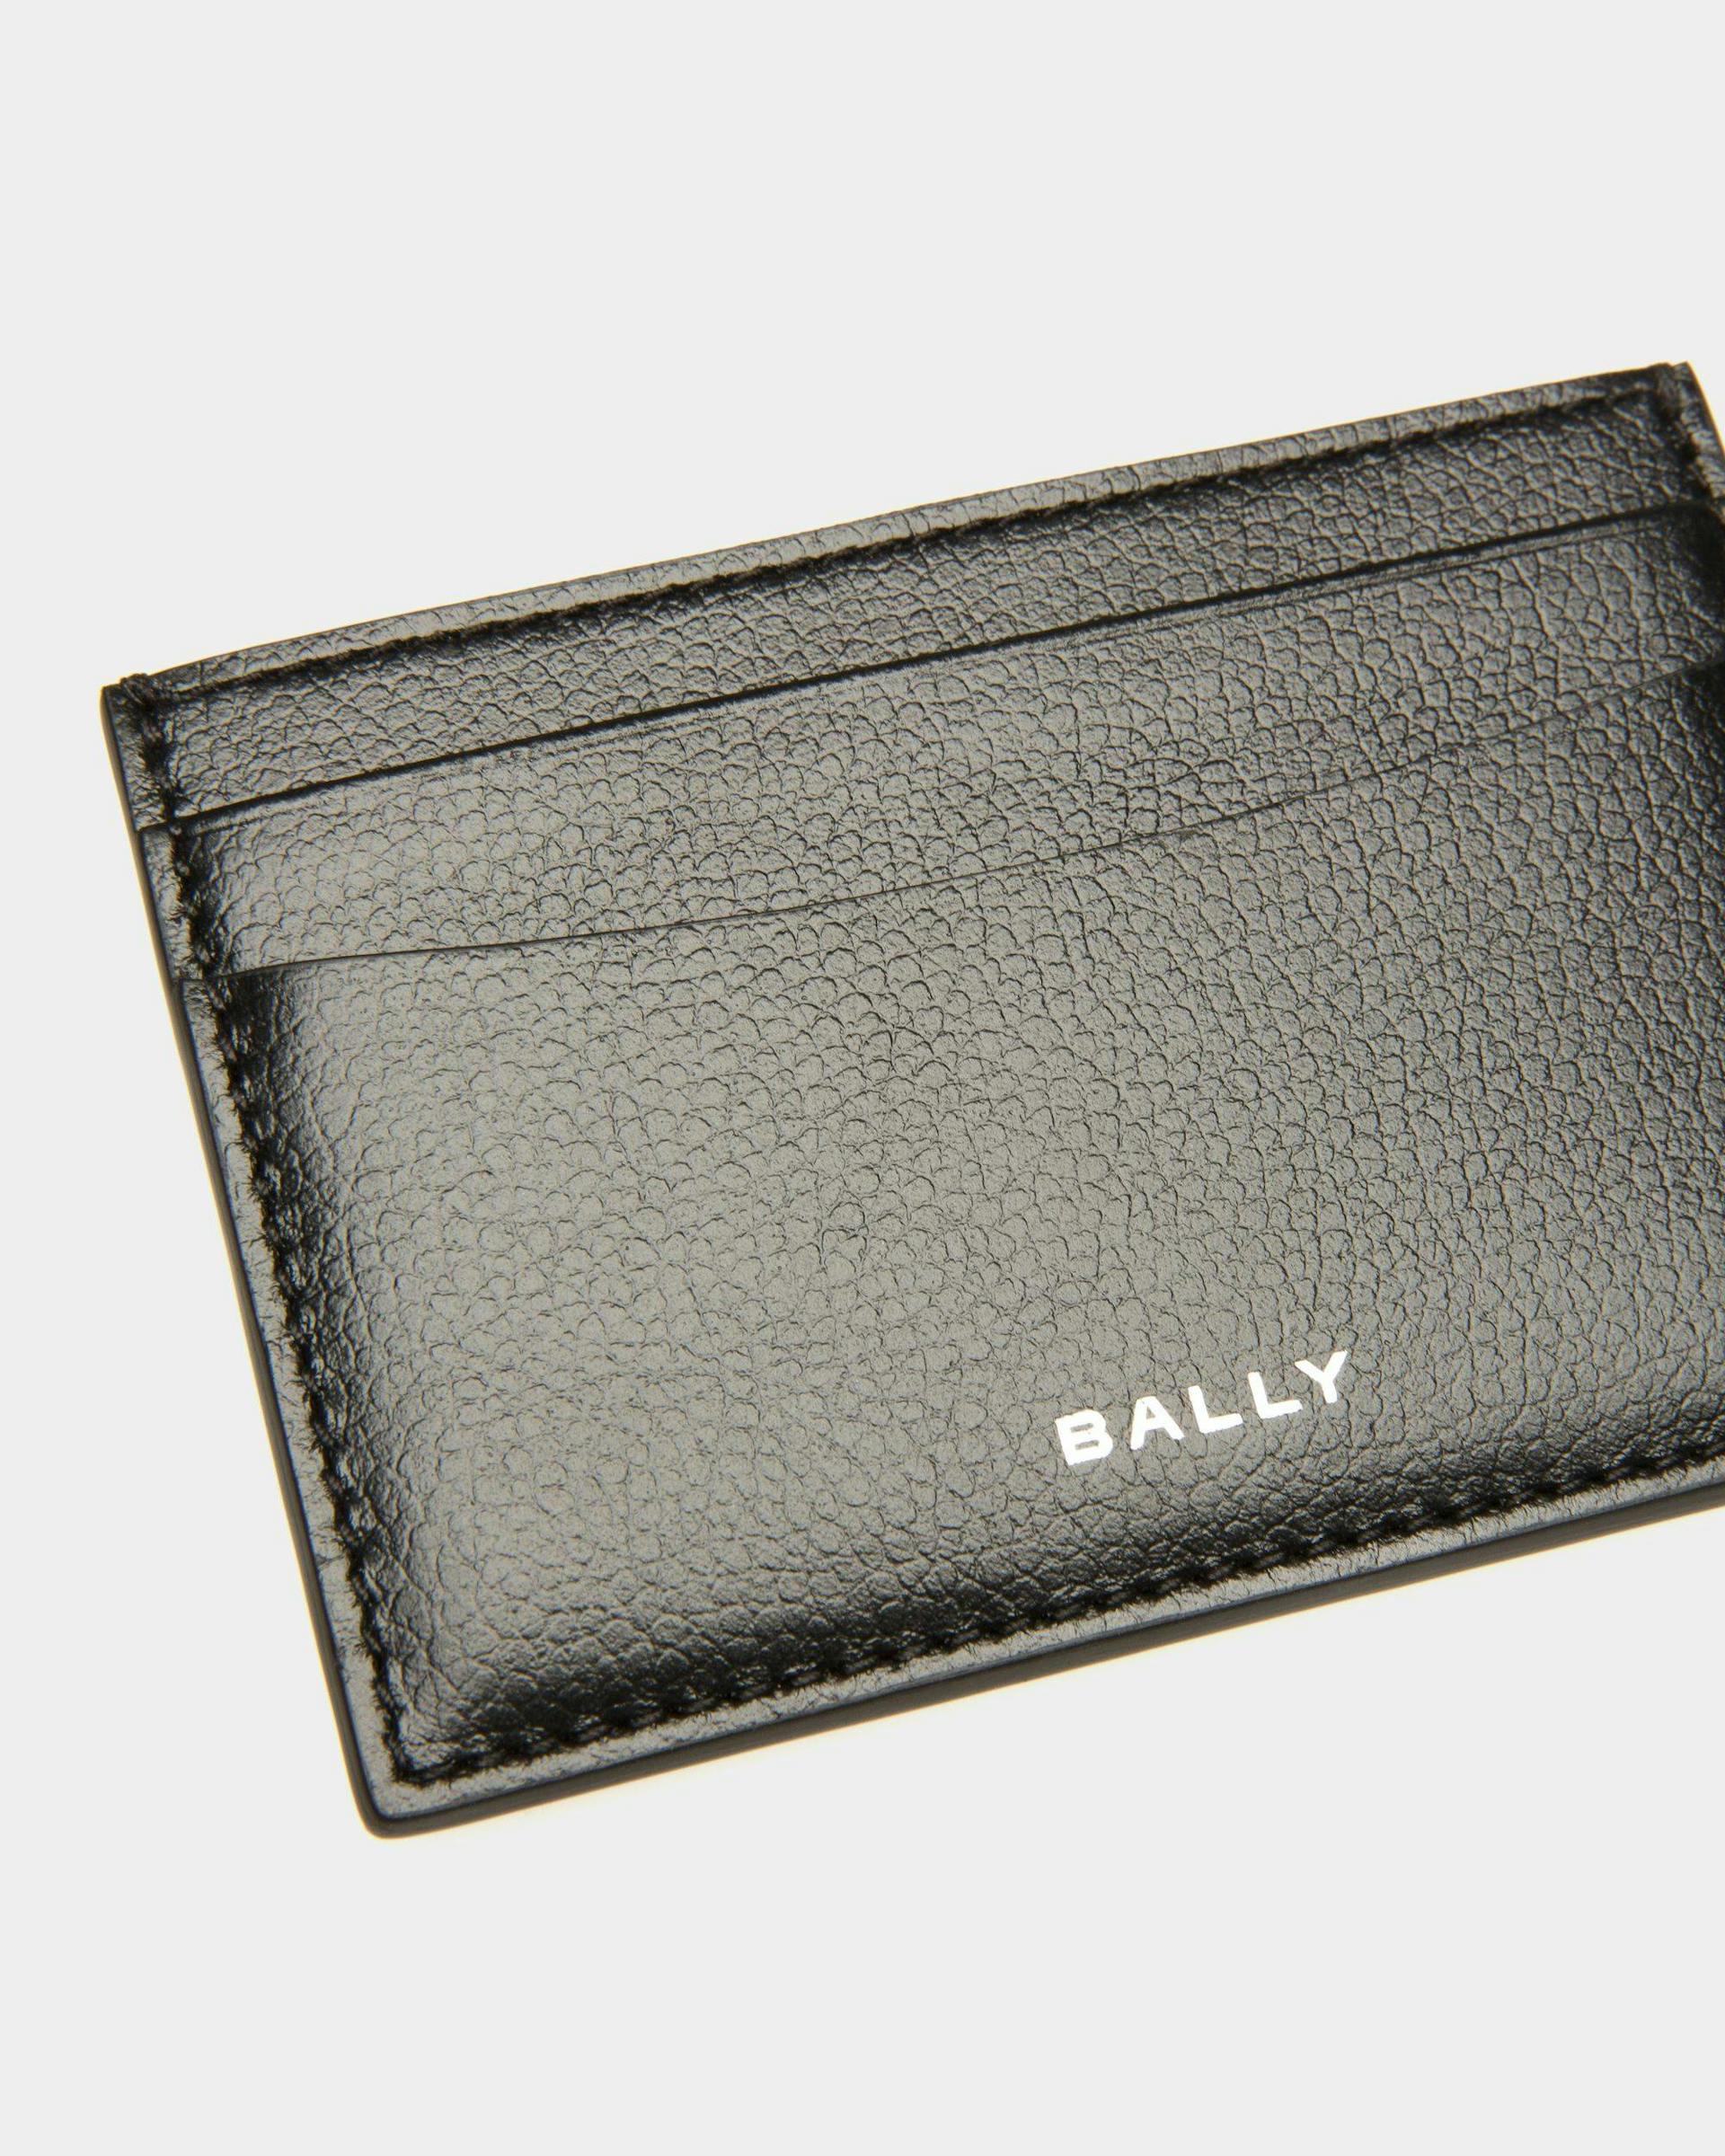 Men's Banque Business Card Holder In Black Leather | Bally | Still Life Detail